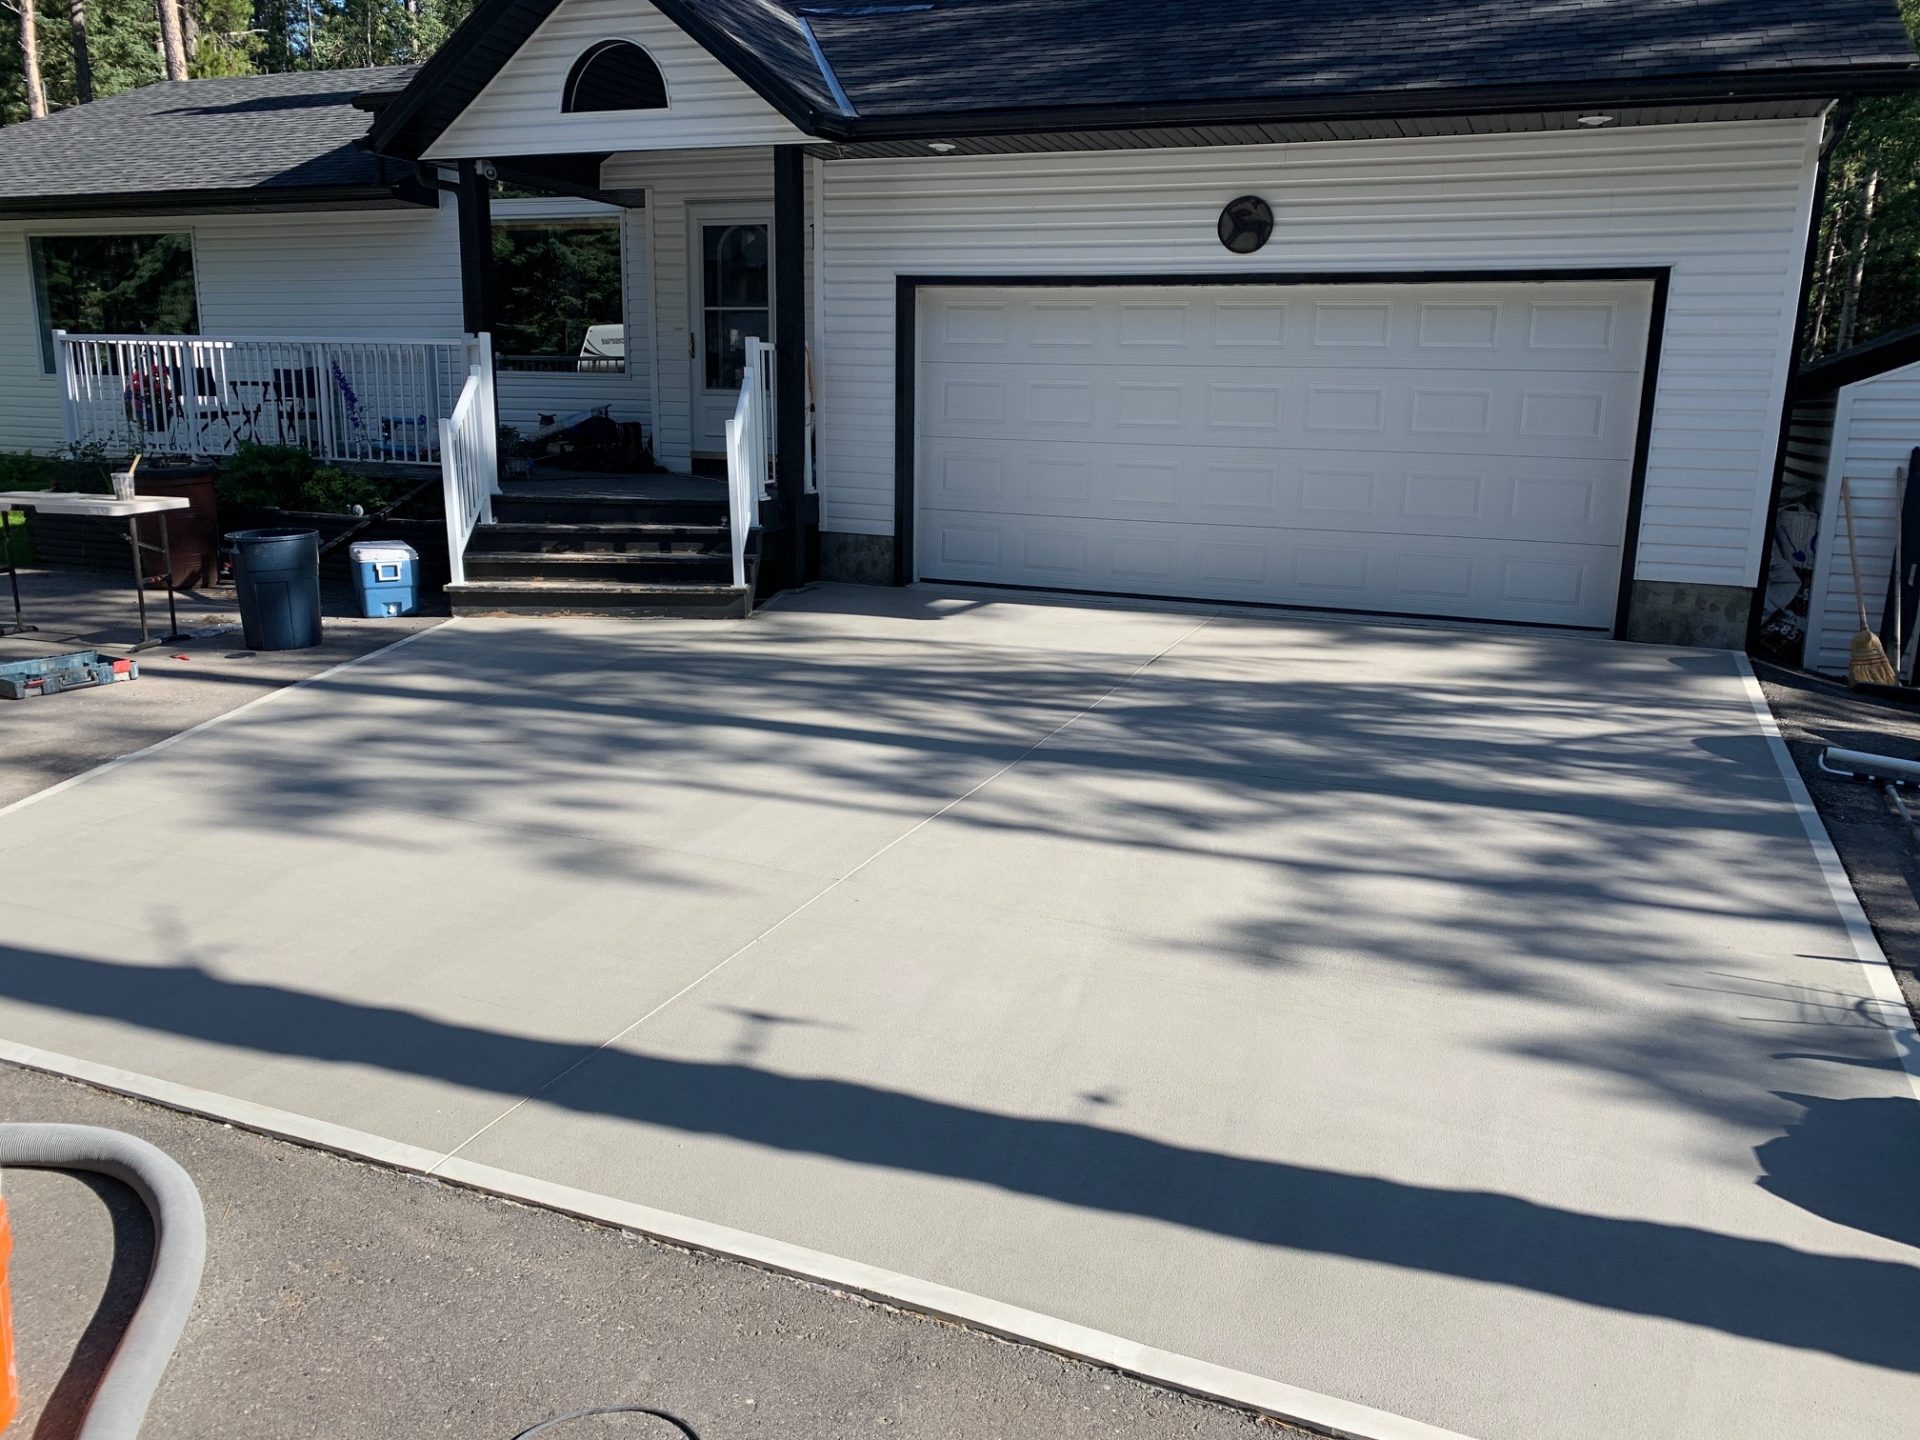 - Private Residence - BTF Concrete Services - Exterior concrete repair and resurface and garage repair systems.